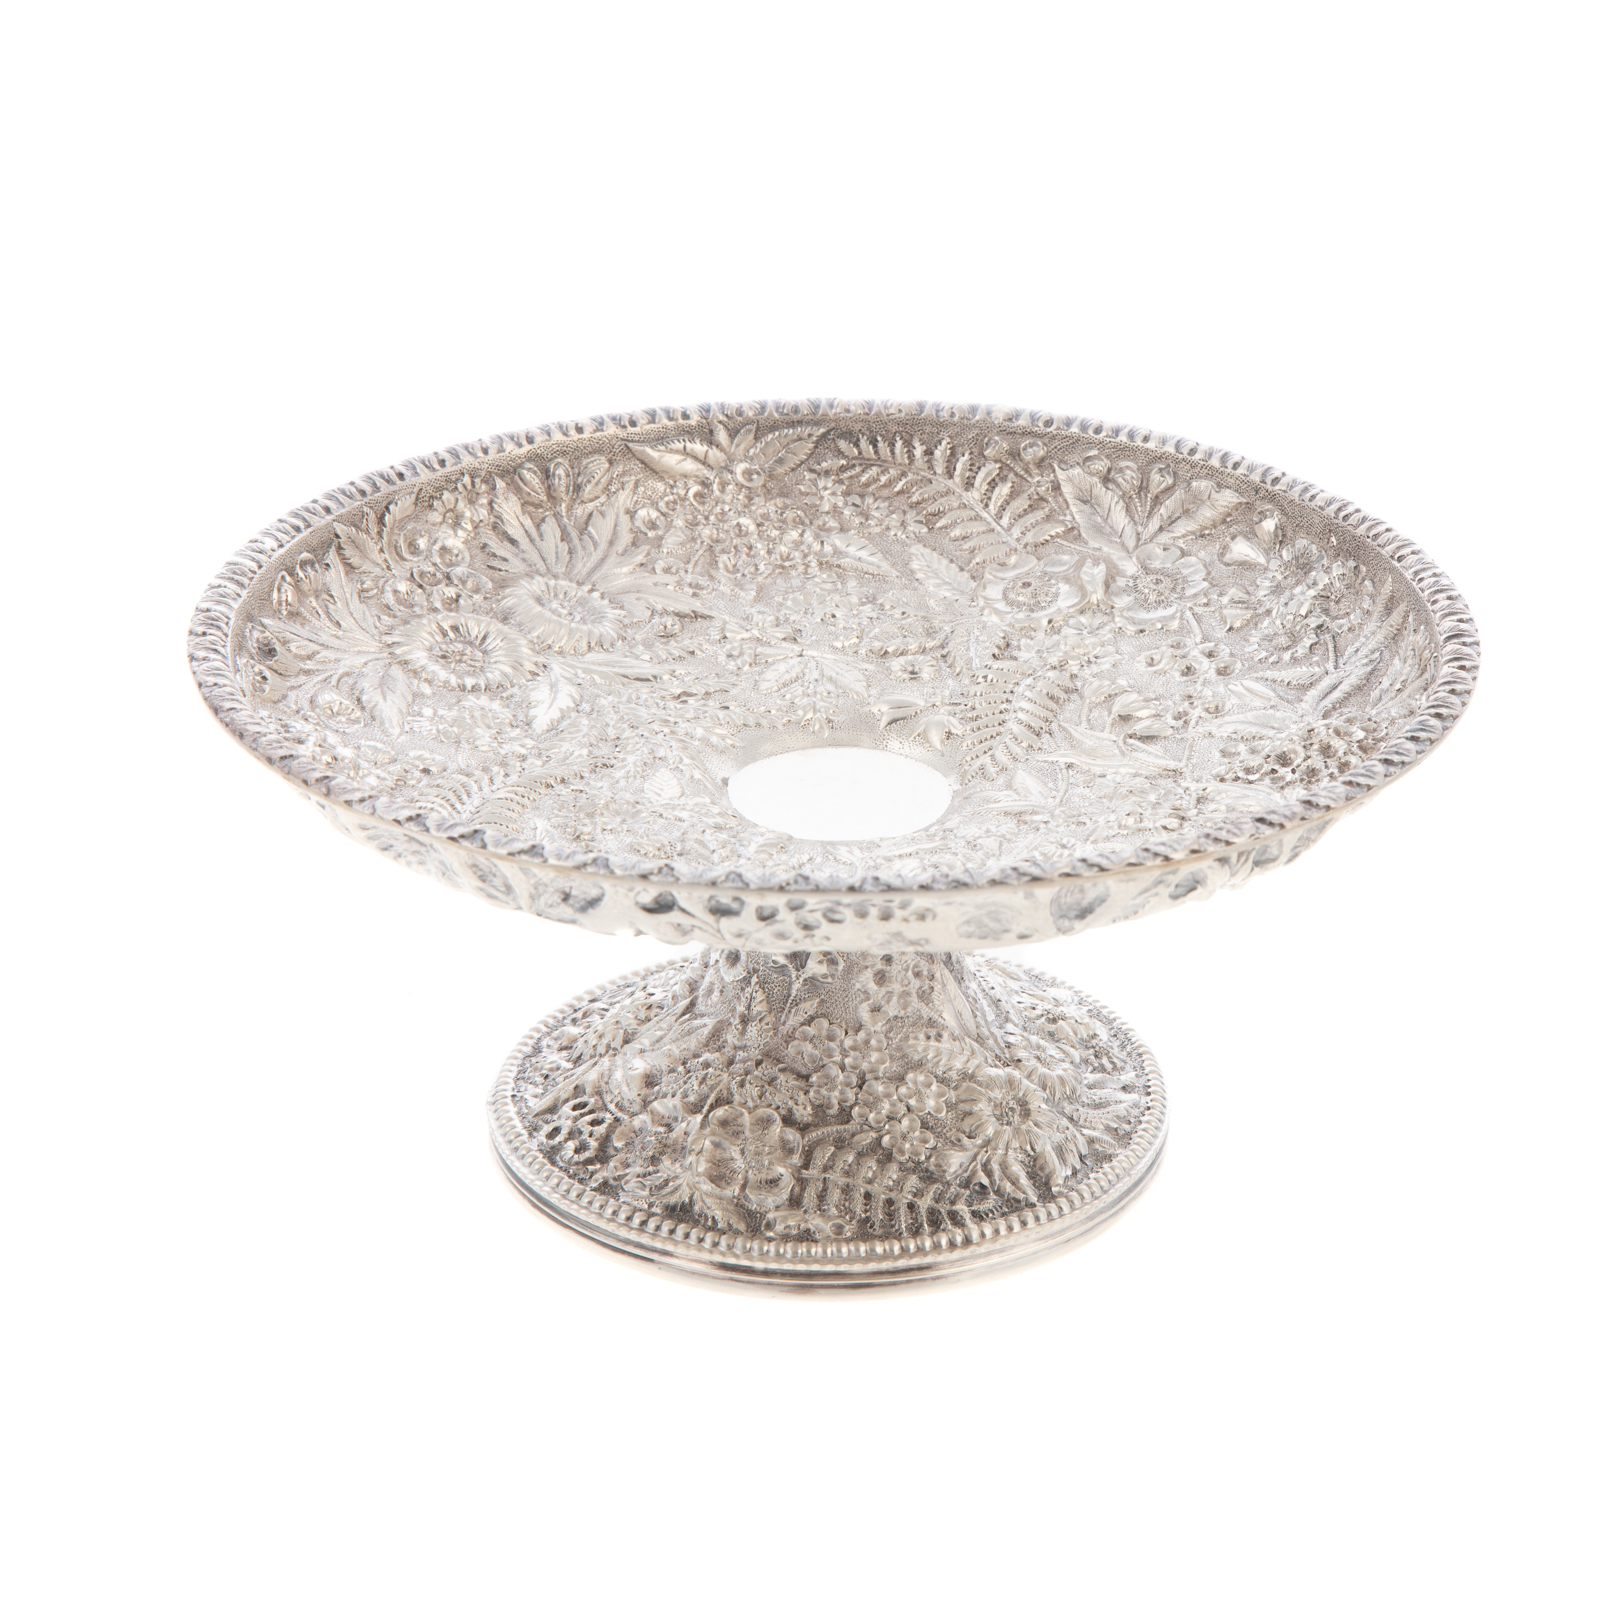 S KIRK SON SILVER REPOUSSE COMPOTE 33872f